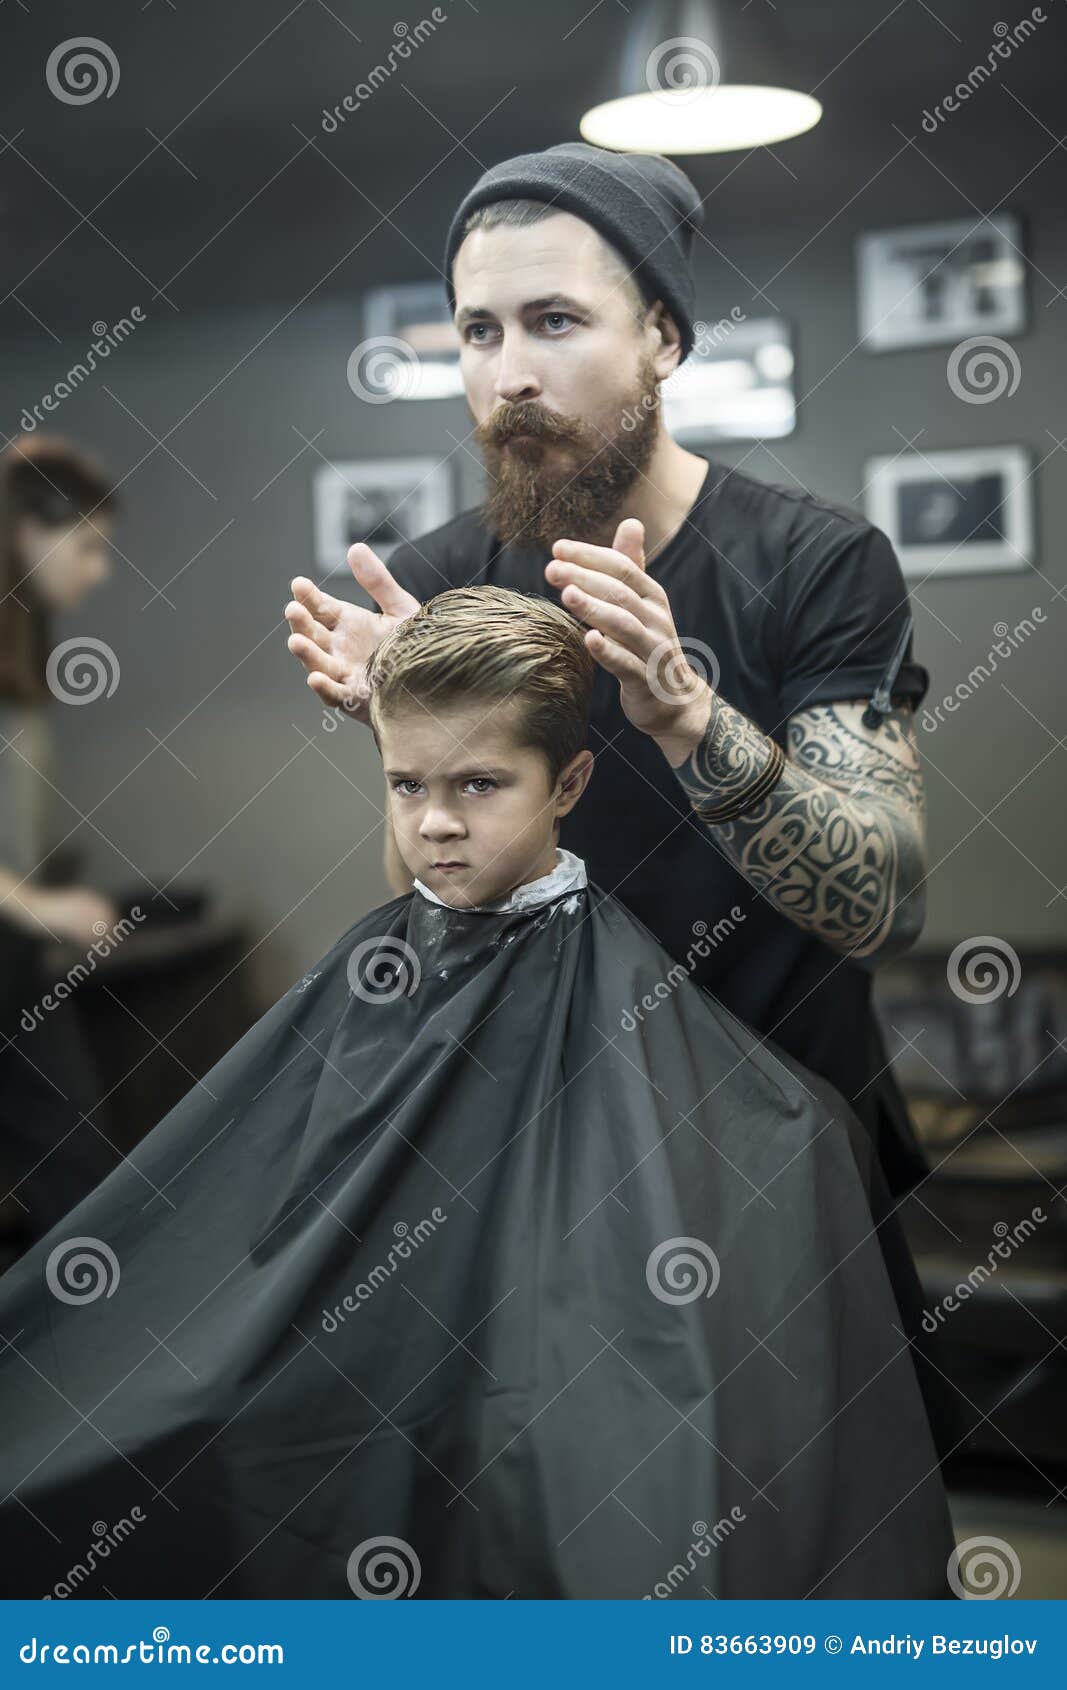 Kid S Hair Styling In Barbershop Stock Image Image Of Stylist